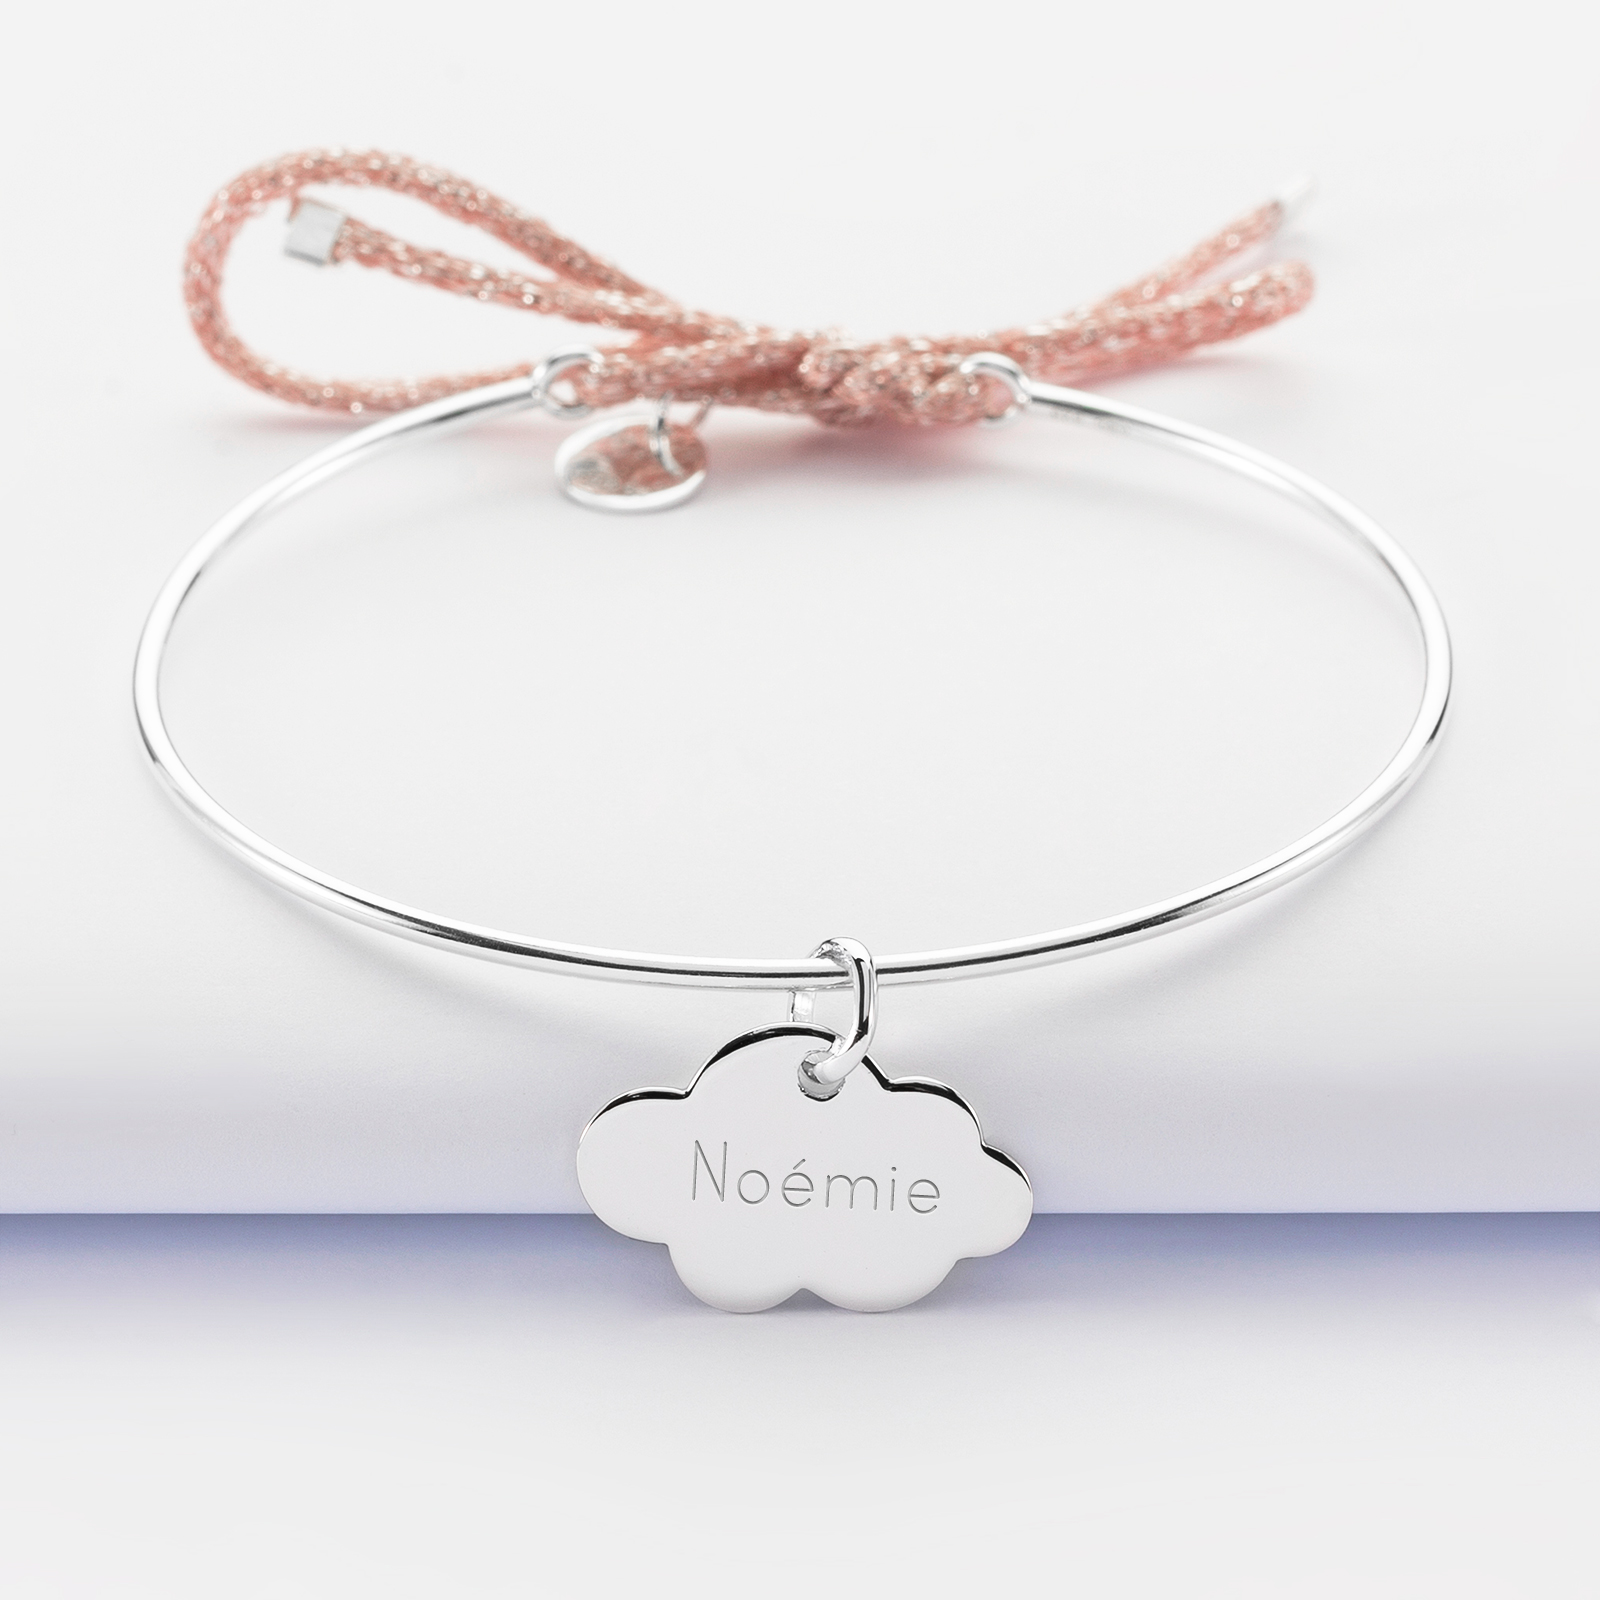 Personalised silver and sparkly cord bangle bracelet and 19 mm engraved cloud medallion 20x14 mm - name